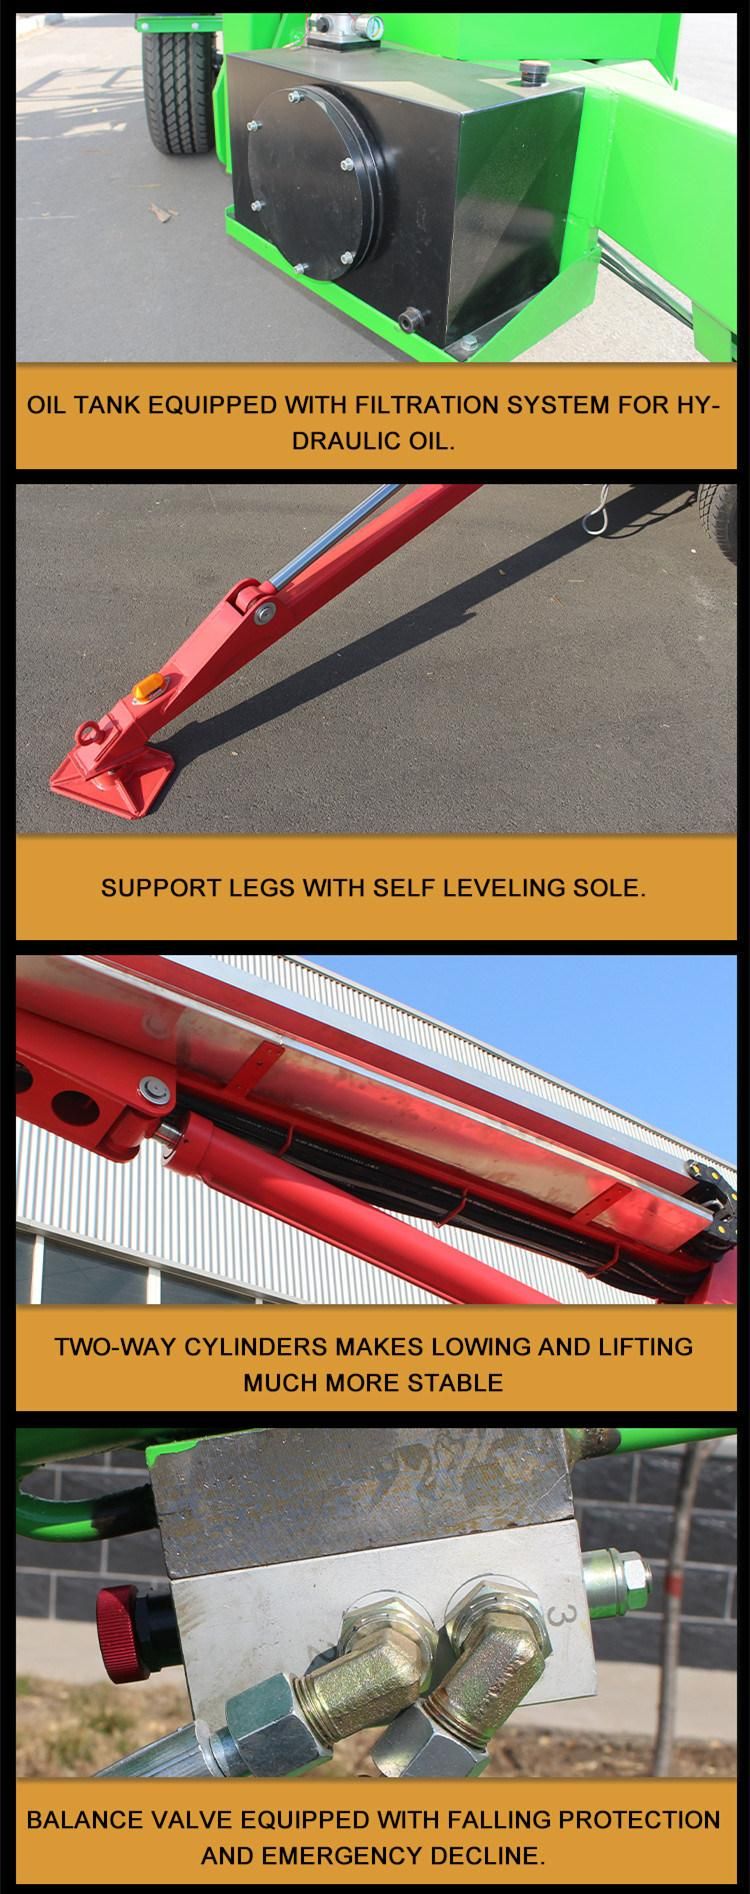 High Quality Towable Boom Electric Personal Construction Lift Hoist Lifting Equipment Tools Lifter